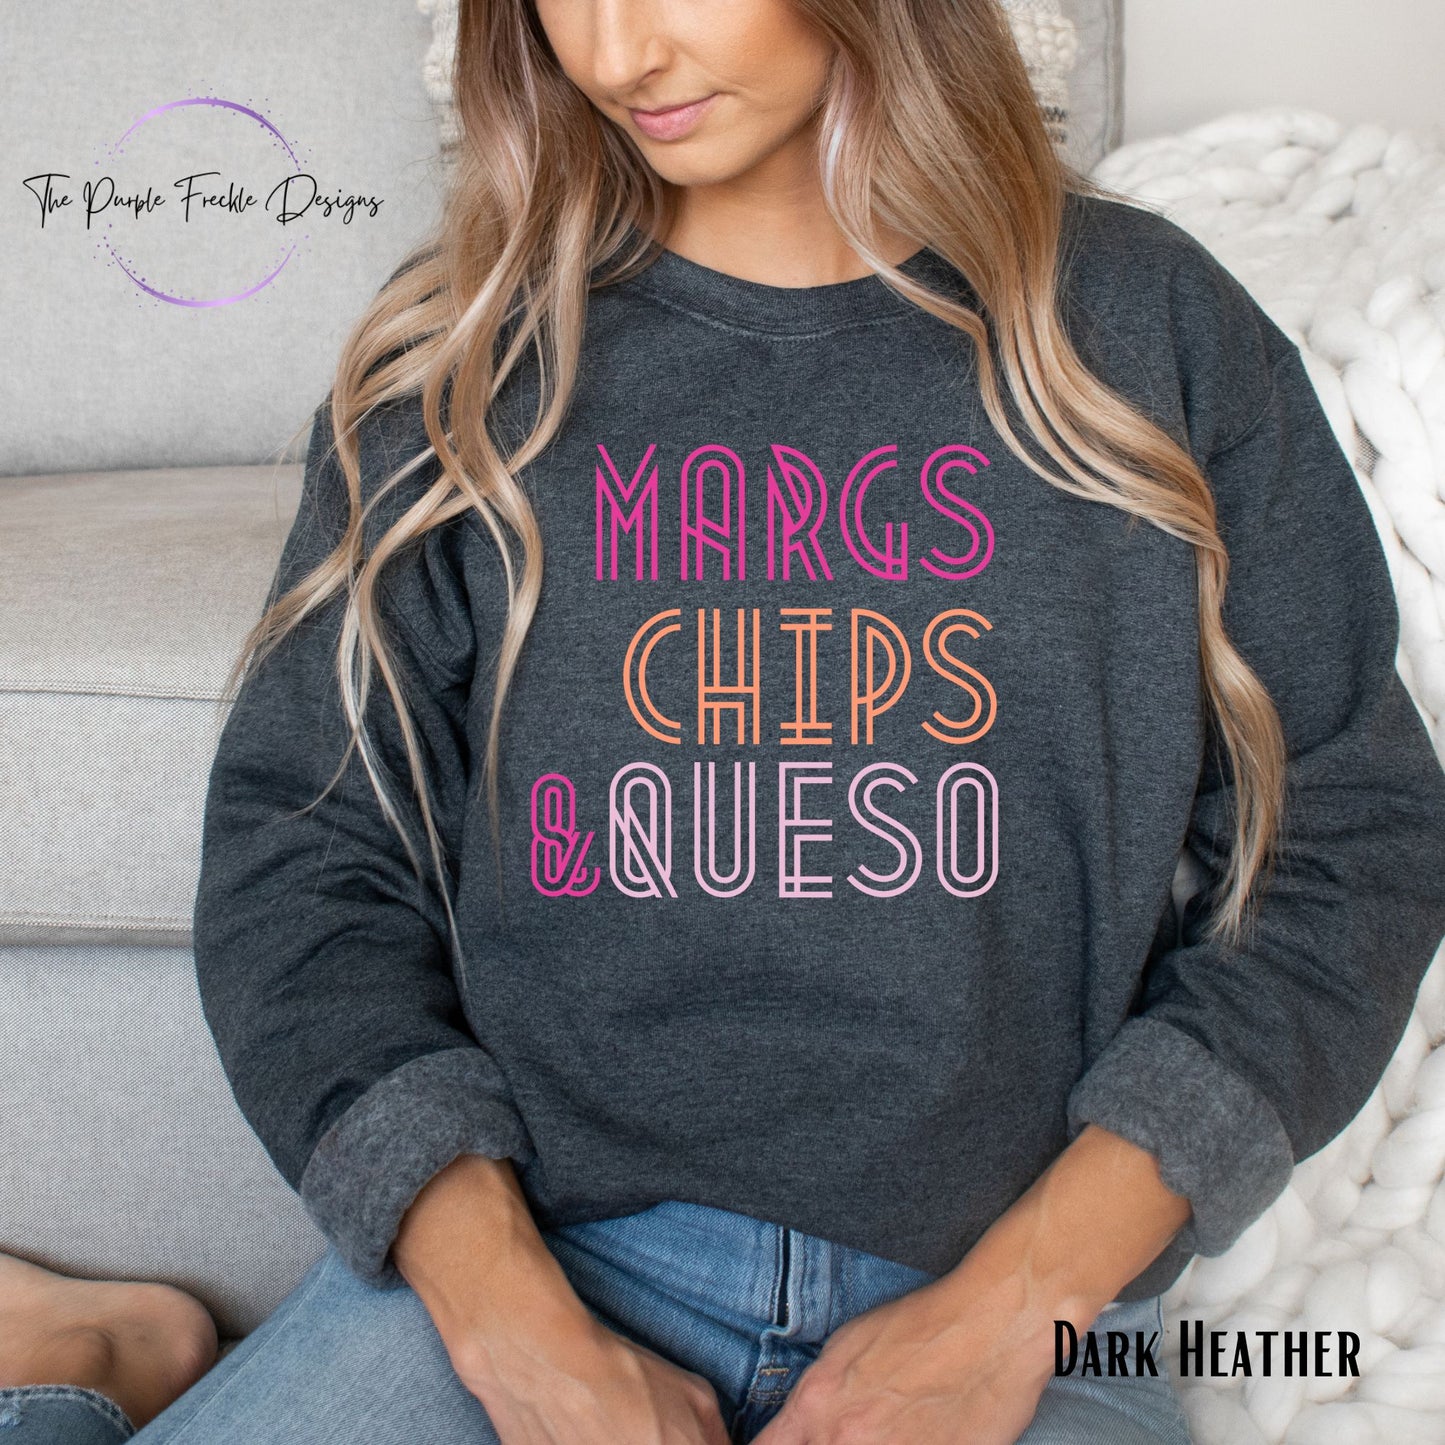 Margs Chips Queso